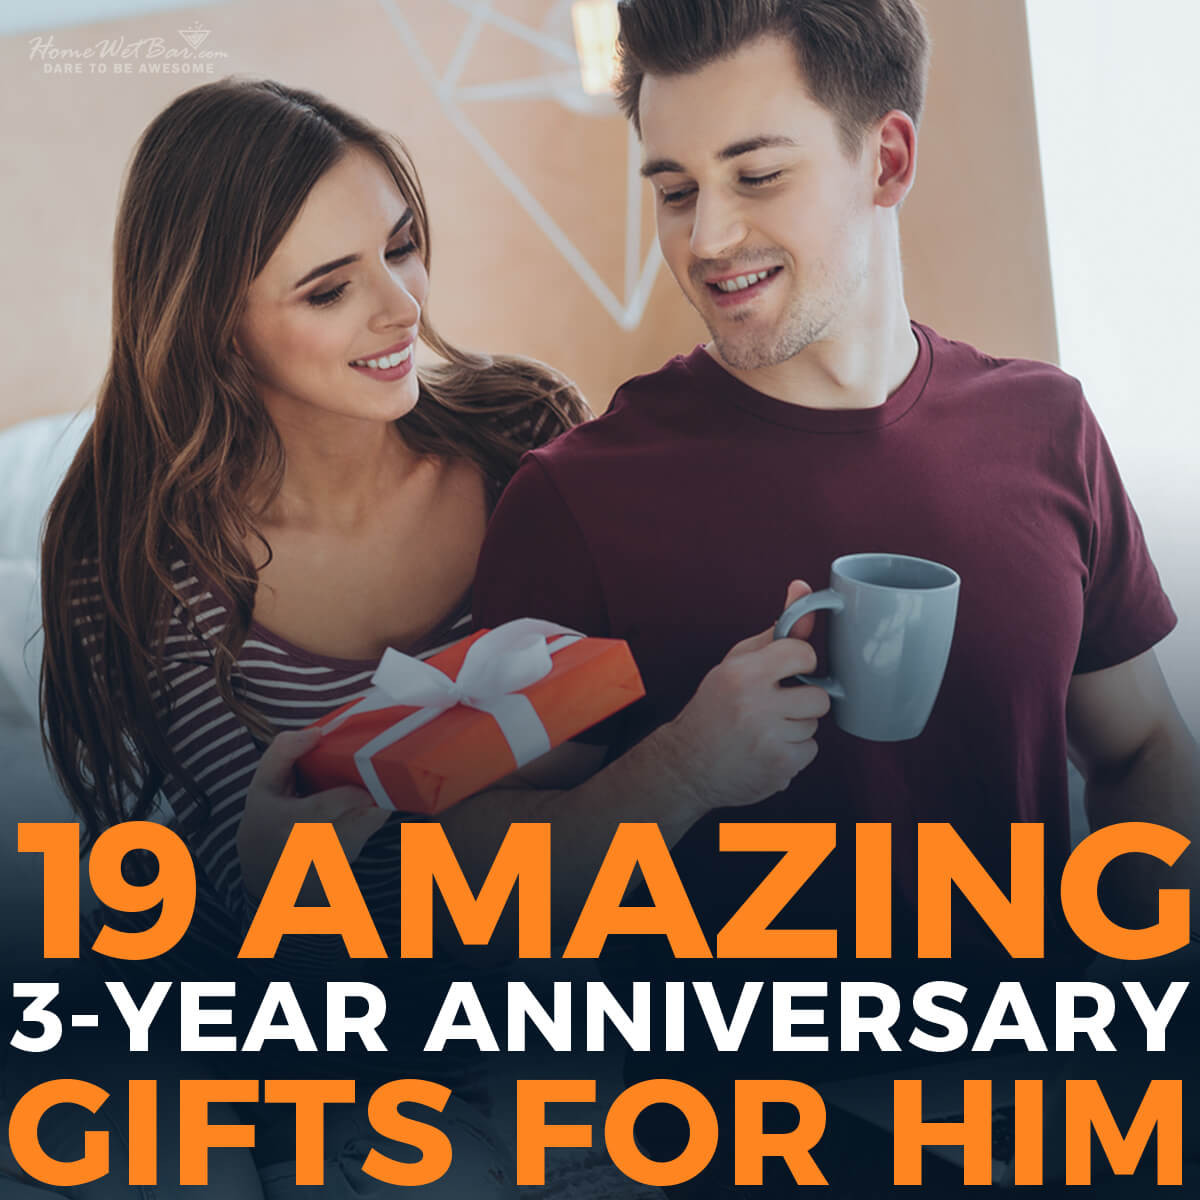 3 Year Dating Anniversary Gift Ideas For Him
 19 Amazing 3 Year Anniversary Gift Ideas for Him